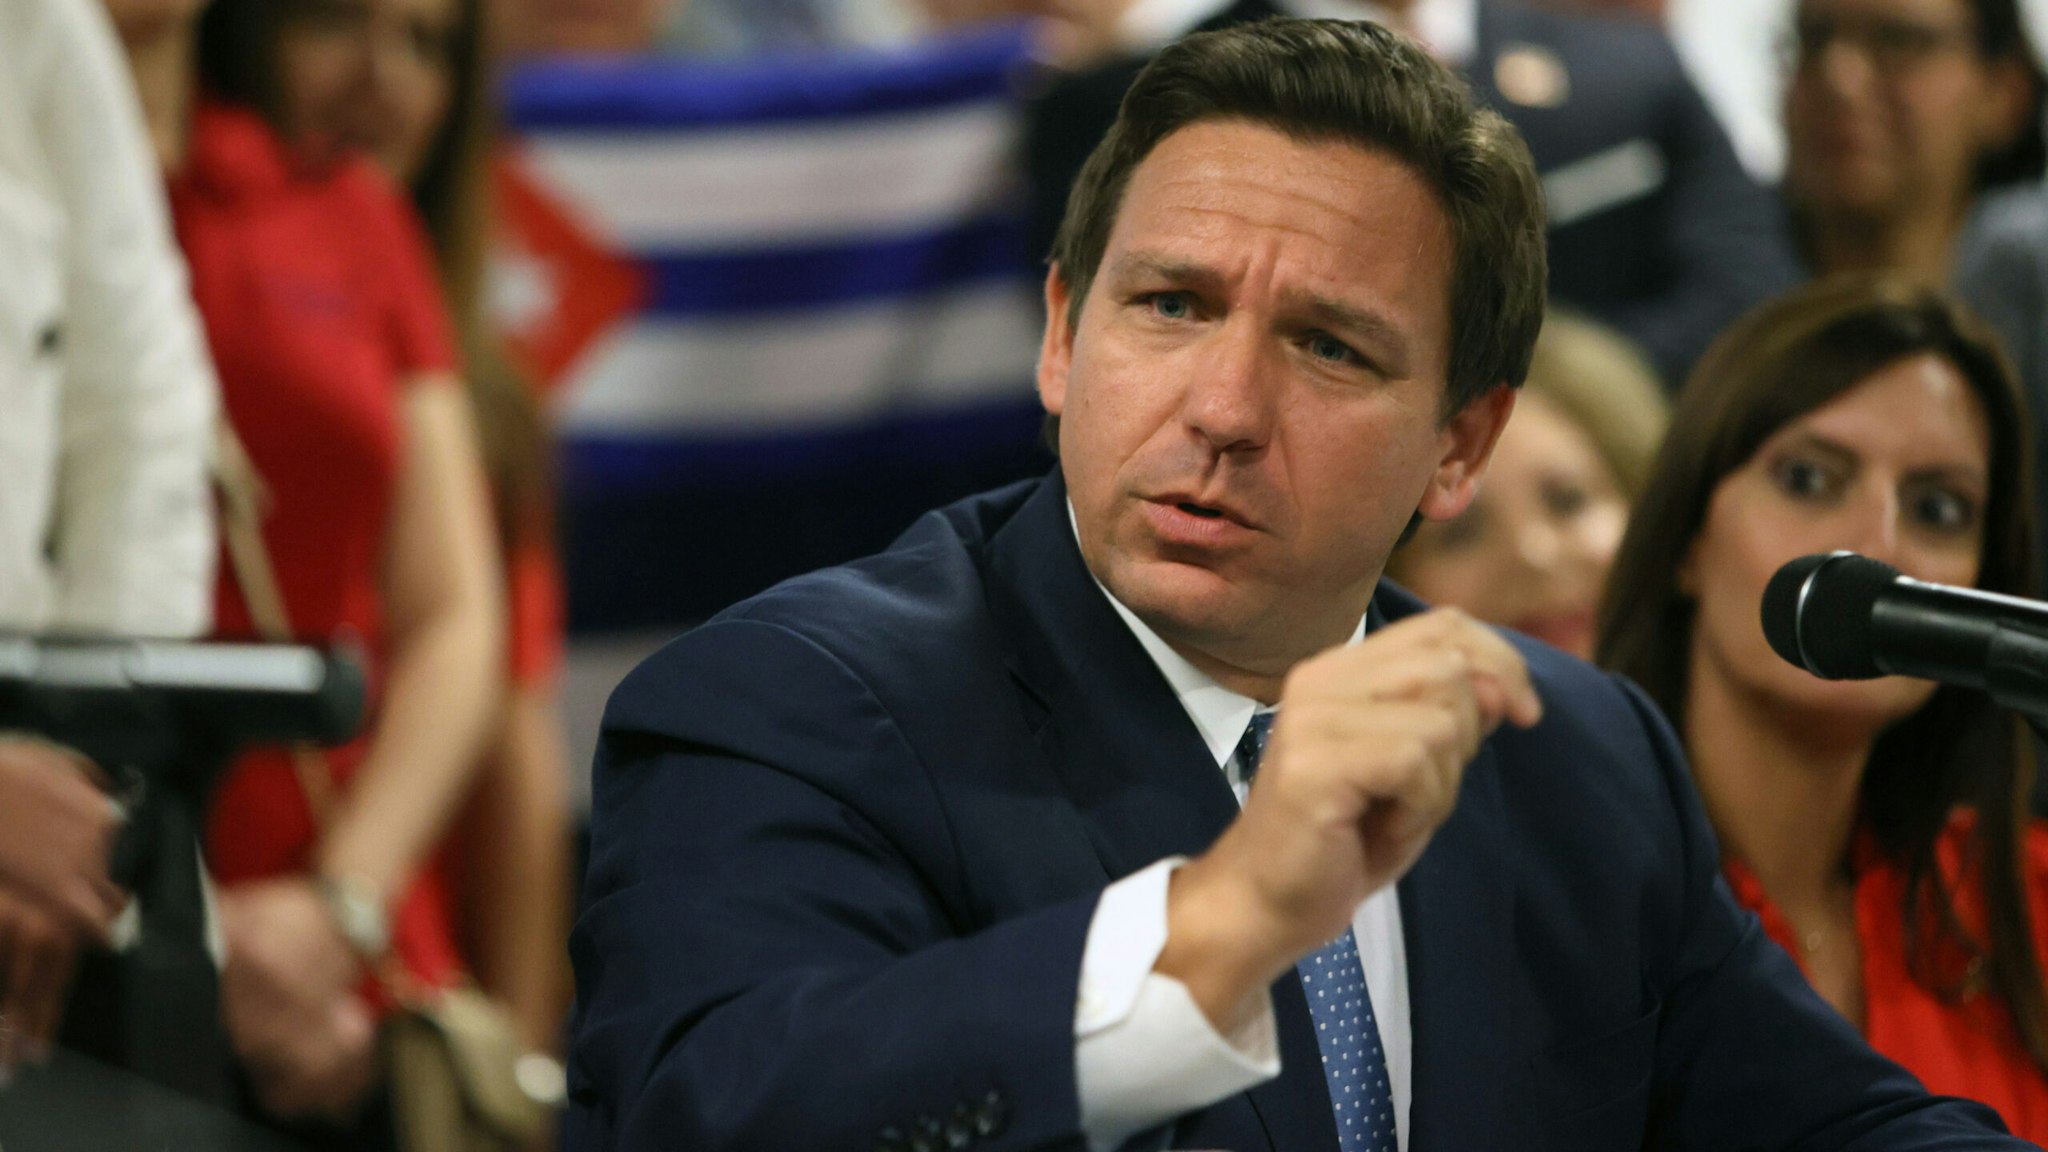 MIAMI, FLORIDA - JULY 13: Florida Gov. Ron DeSantis takes part in a roundtable discussion about the uprising in Cuba at the American Museum of the Cuba Diaspora on July 13, 2021 in Miami, Florida. Thousands of people took to the streets in Cuba on Sunday to protest against the government.